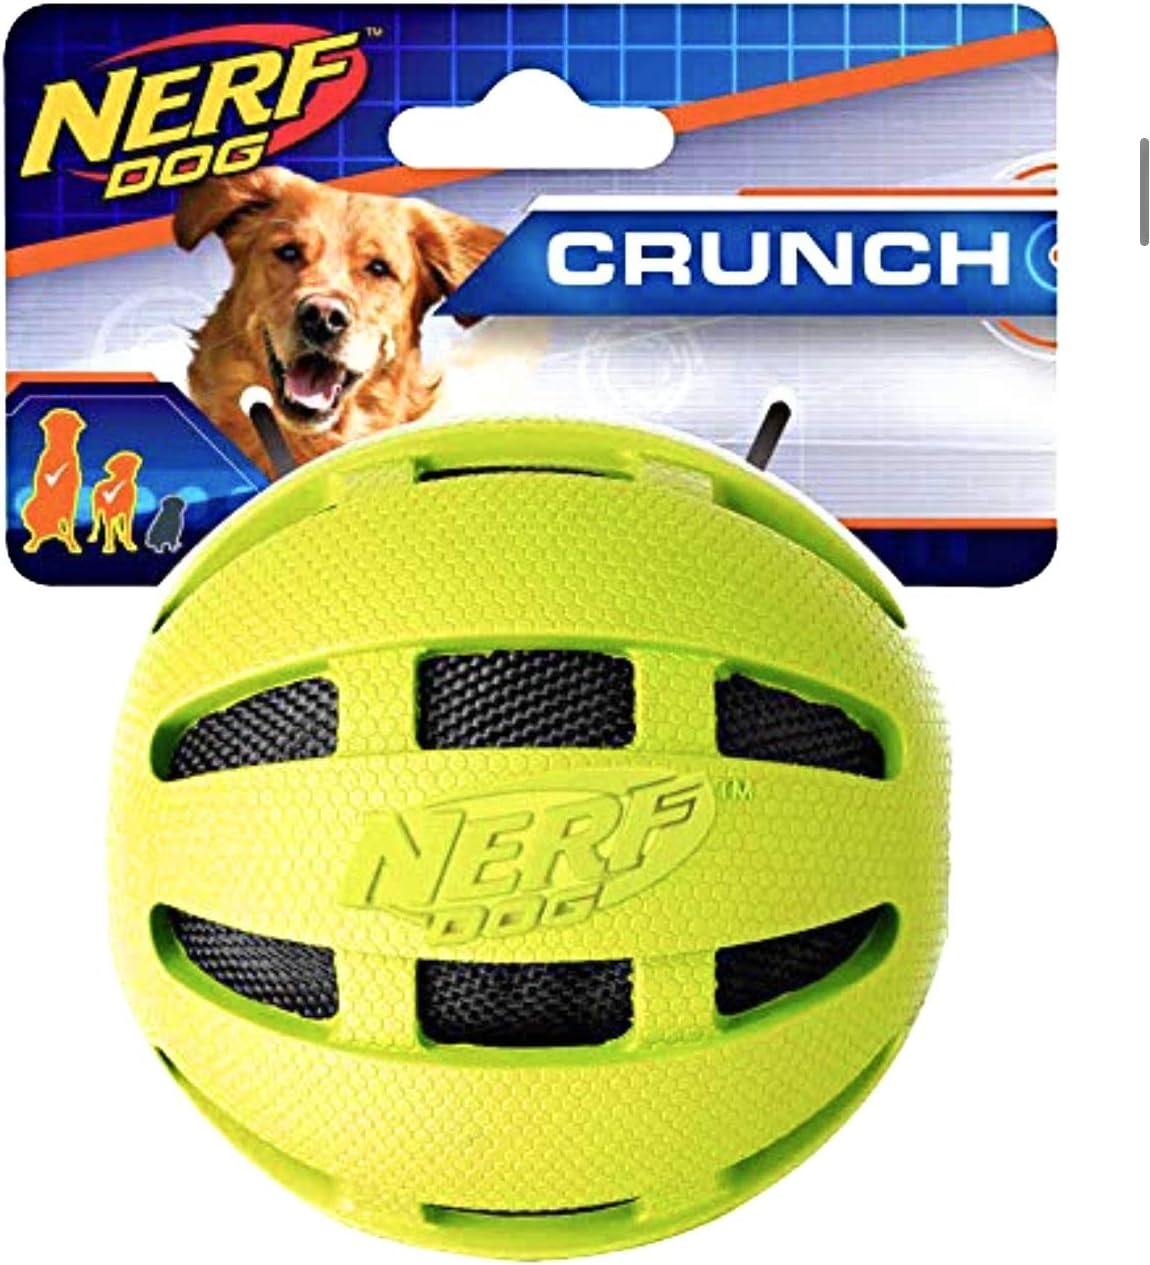 Nerf Dog Checker Ball Dog Toy with Interactive Crunch, Lightweight, Durable and Water Resistant, 3.8 Inches, for Medium/Large Breeds, Single Unit, Green (4272-D)